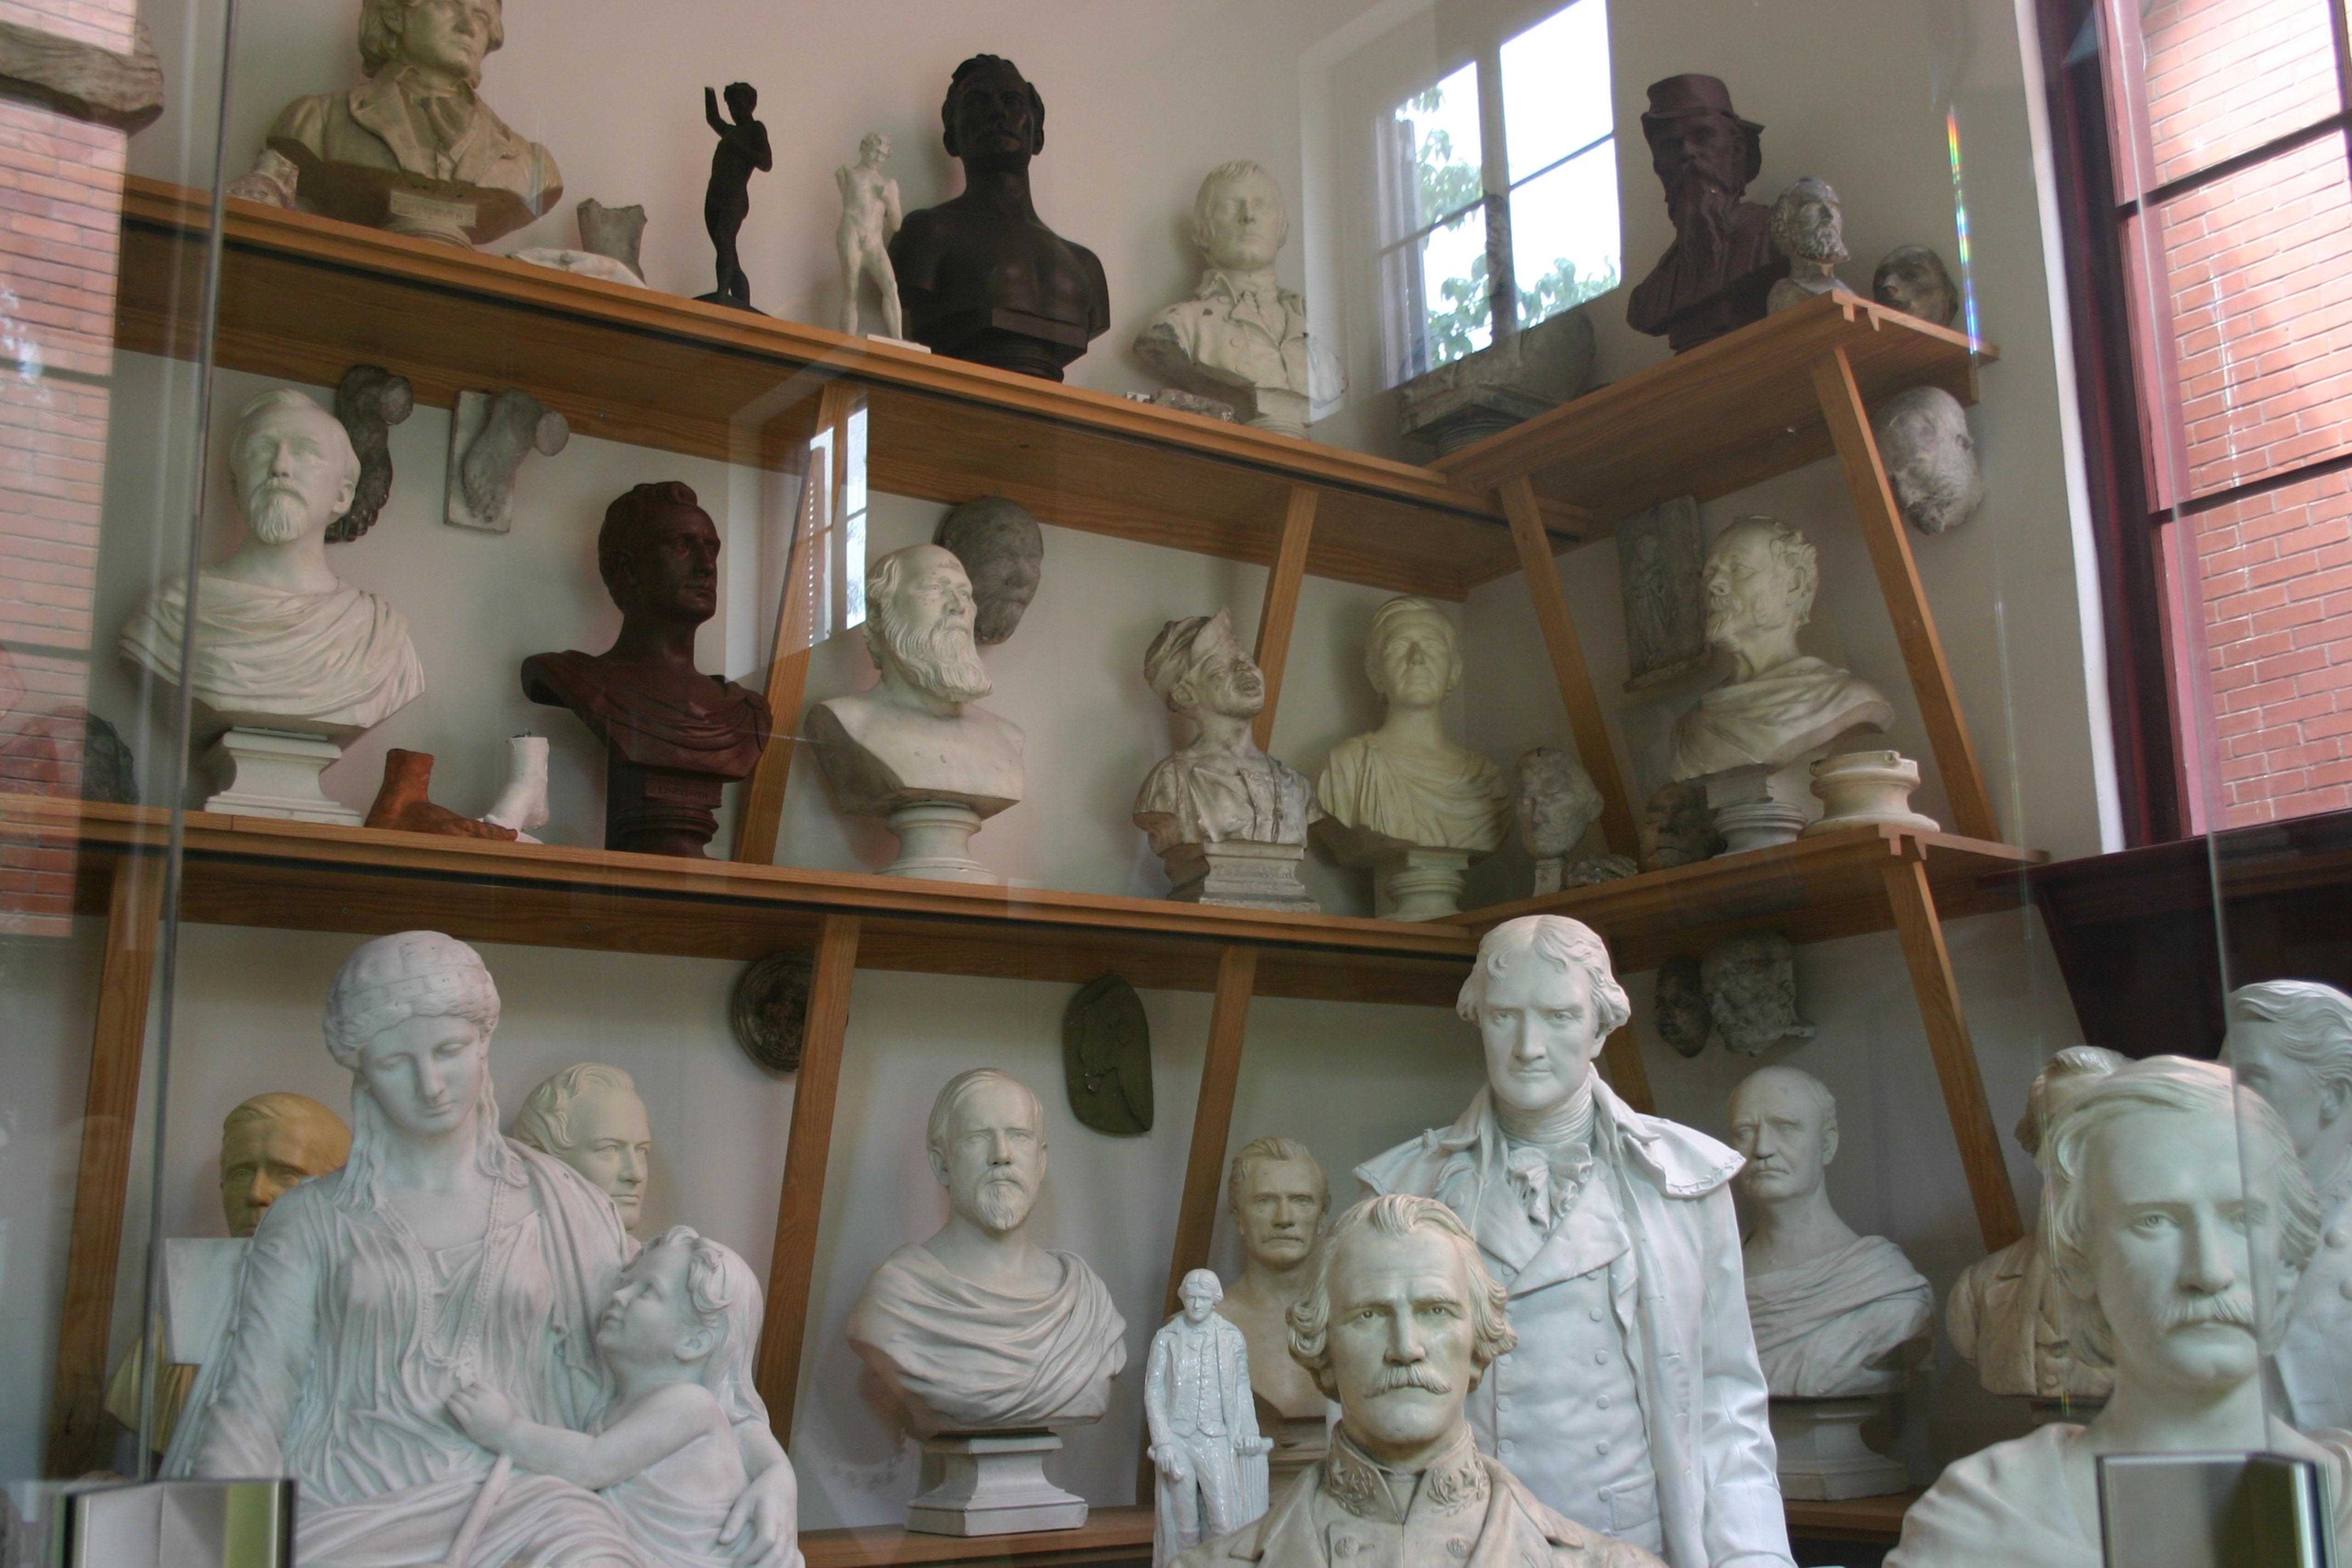 Edward V. Valentine Sculpture Studio - The studio building is one of only five surviving 19th century sculptors' studios in the United States that is open to the public.